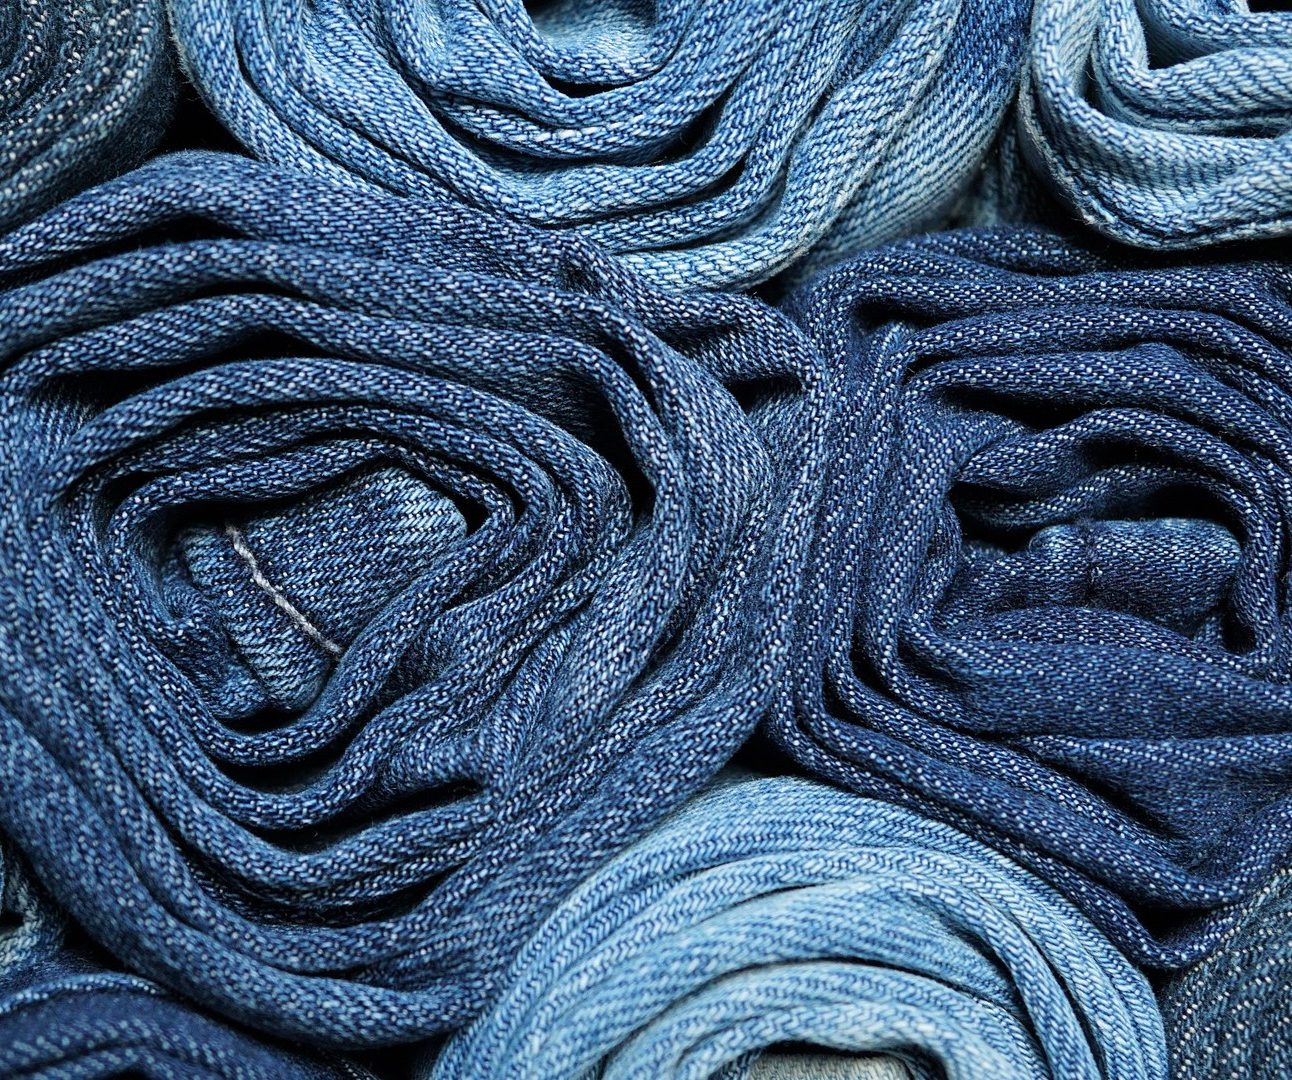 An image showing a pile of denim jeans